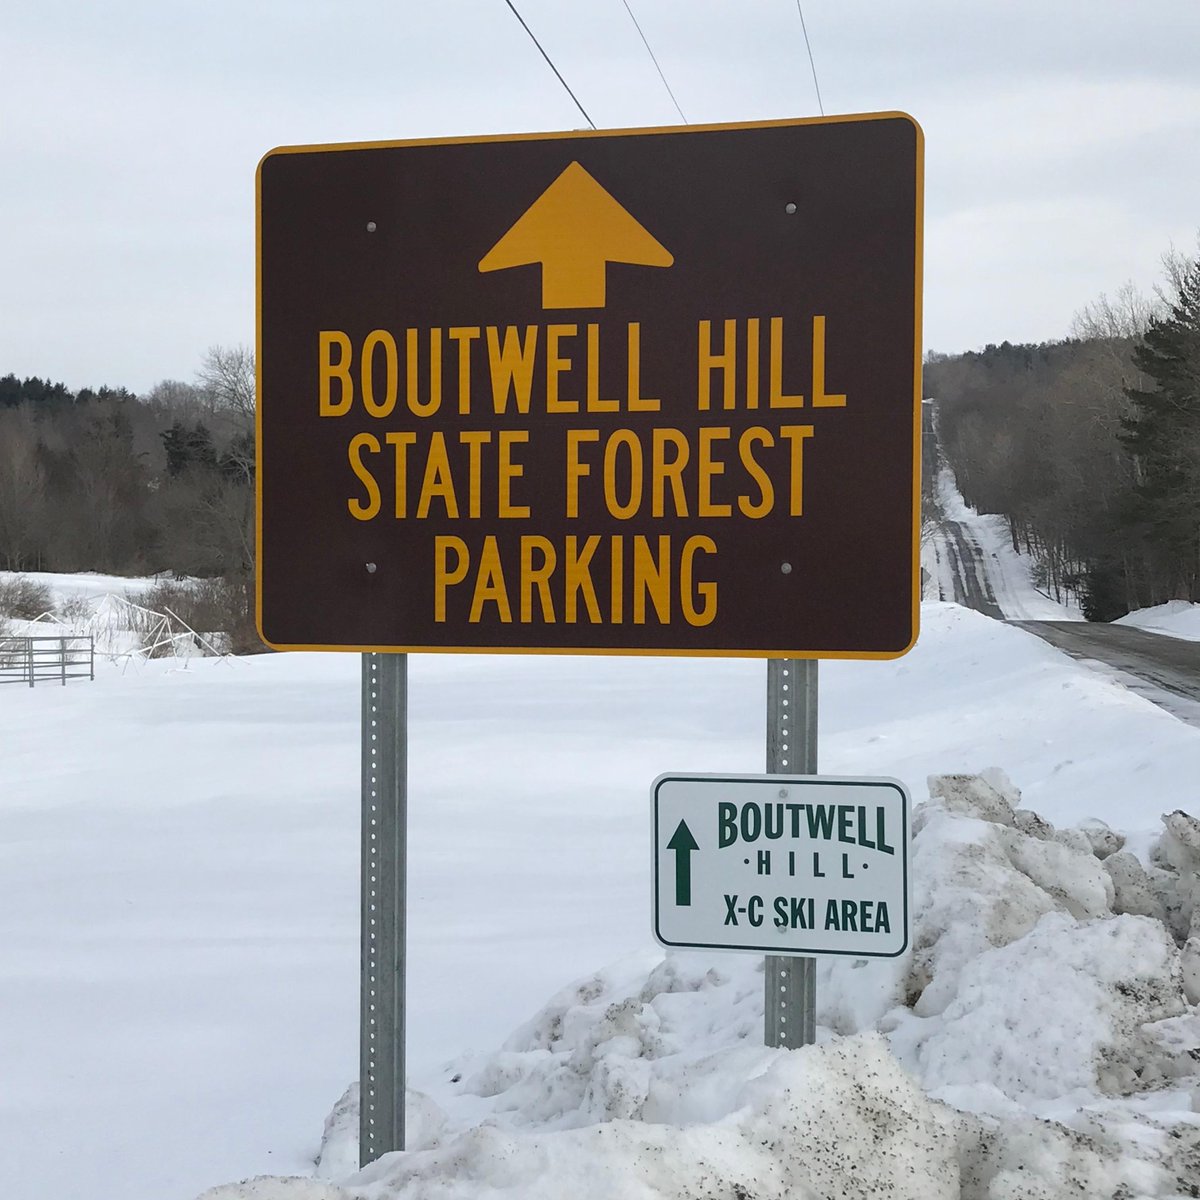 Join DEC Forester Theresa Draves and Friends of the #ChautauquaCounty Greenways for a First Day Hike Jan. 1 @ 1pm at the Boutwell Hill State Forest. More info: fb.me/e/295PdUrqQ
#HikeCHQ #ExploreCHQ #ExploreWNY #CHQ #LiveCHQ #OptOutside #QualityOfLIfeMatters #Trails #WNY